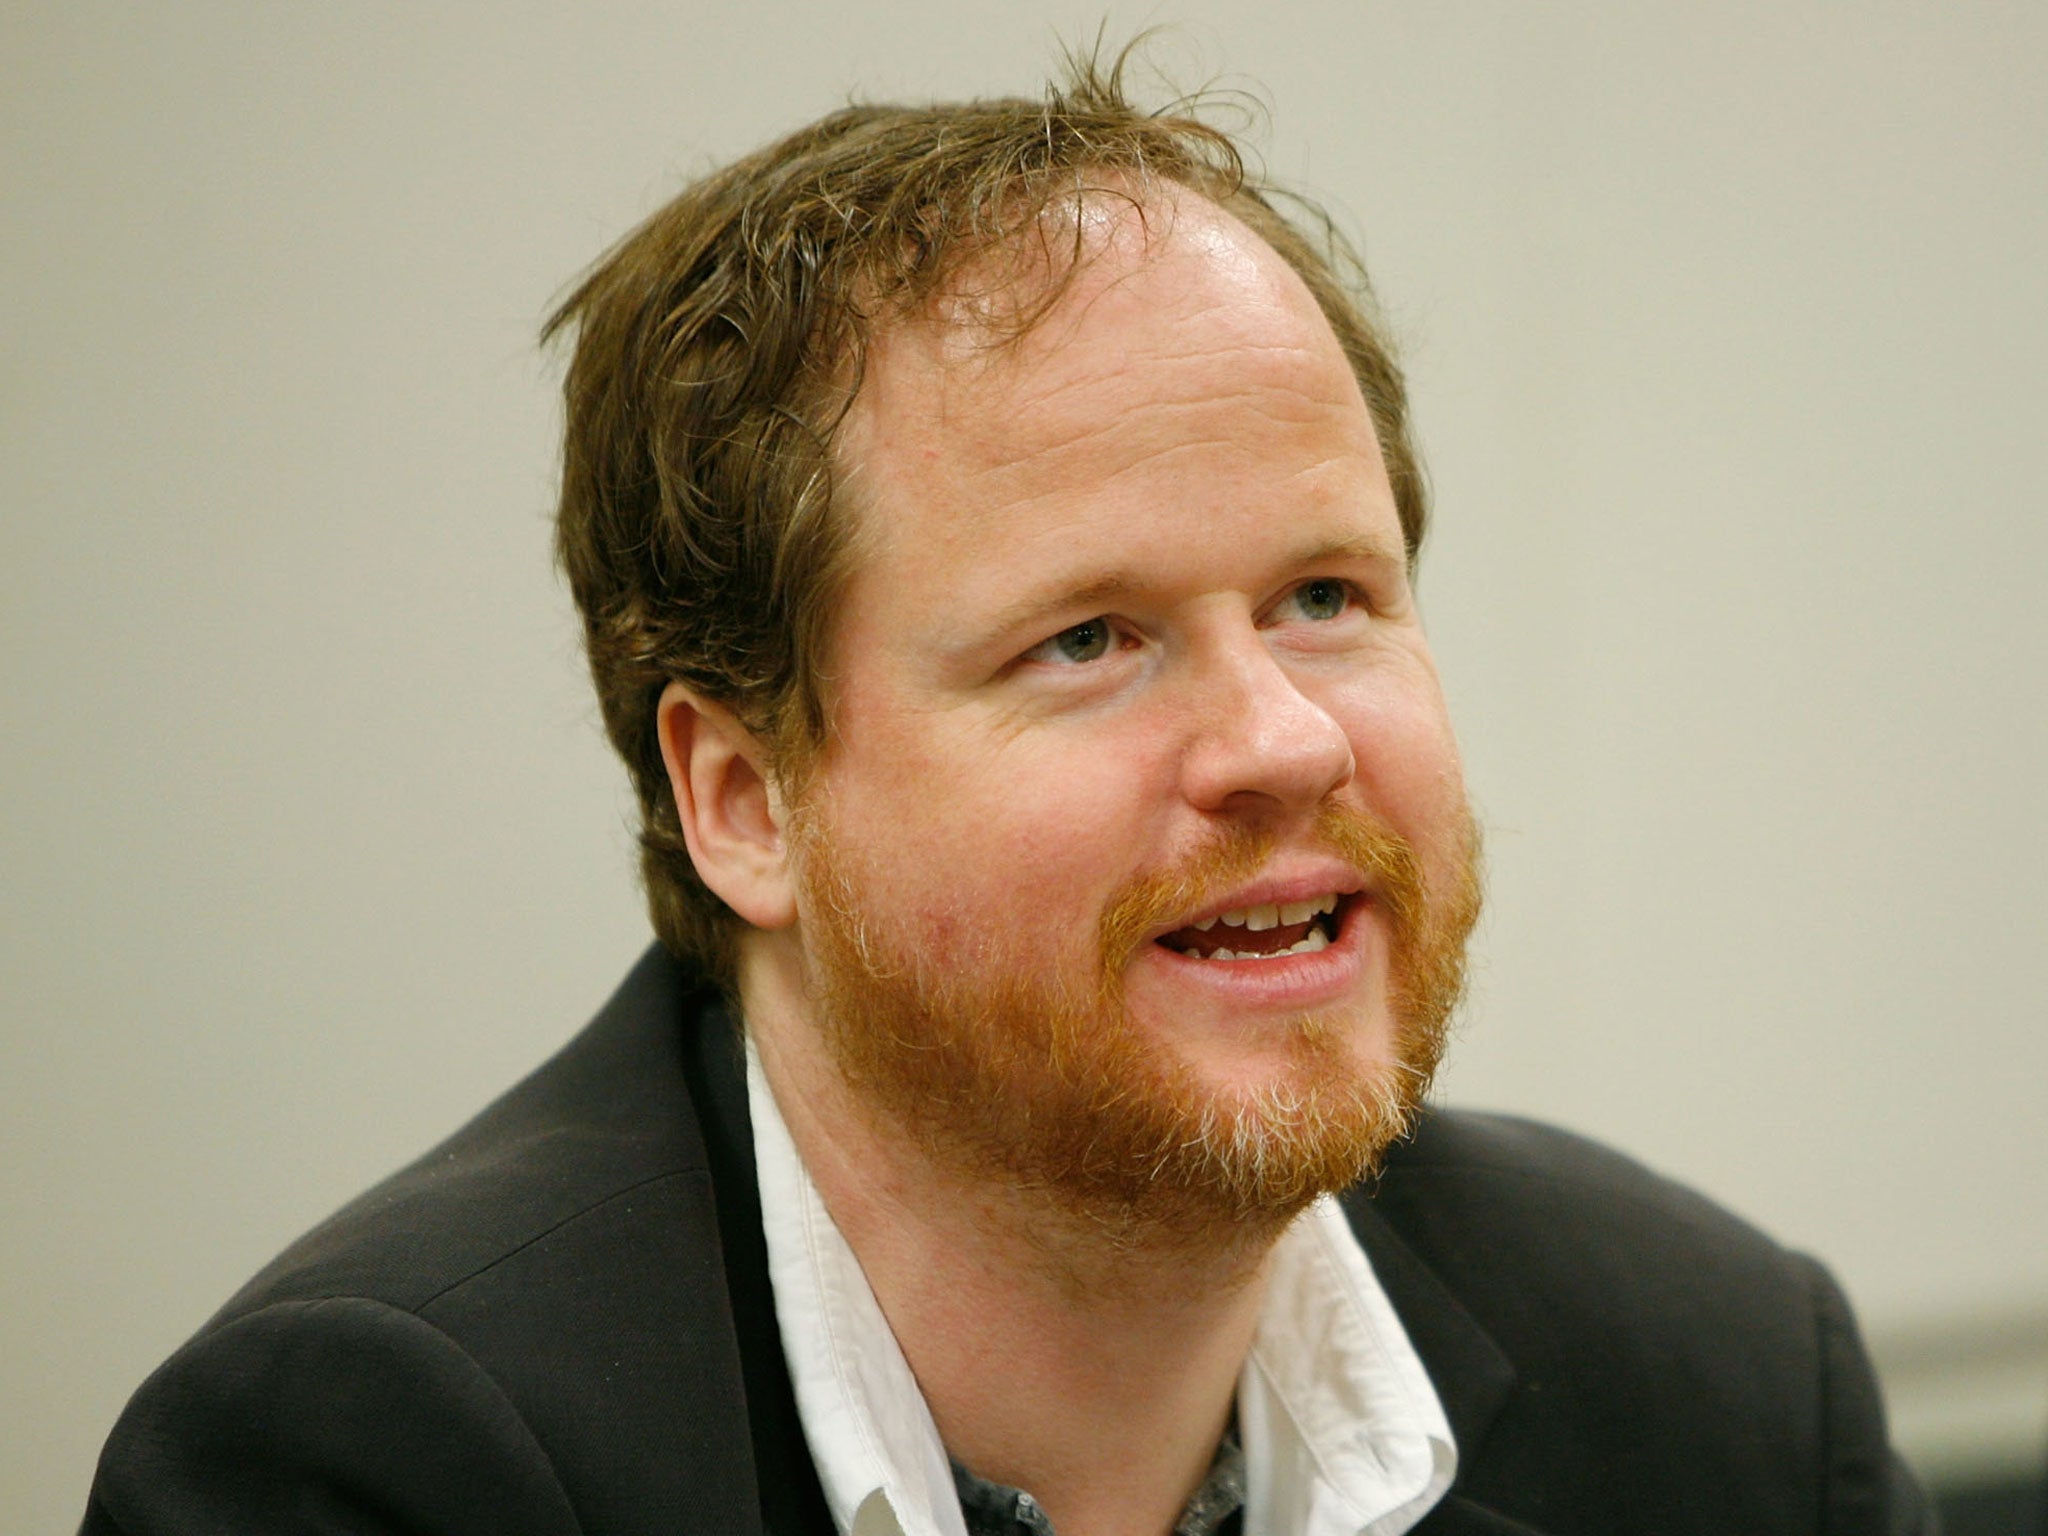 Cult film director Joss Whedon dropped In Your Eyes on Vimeo unexpectedly on Sunday night